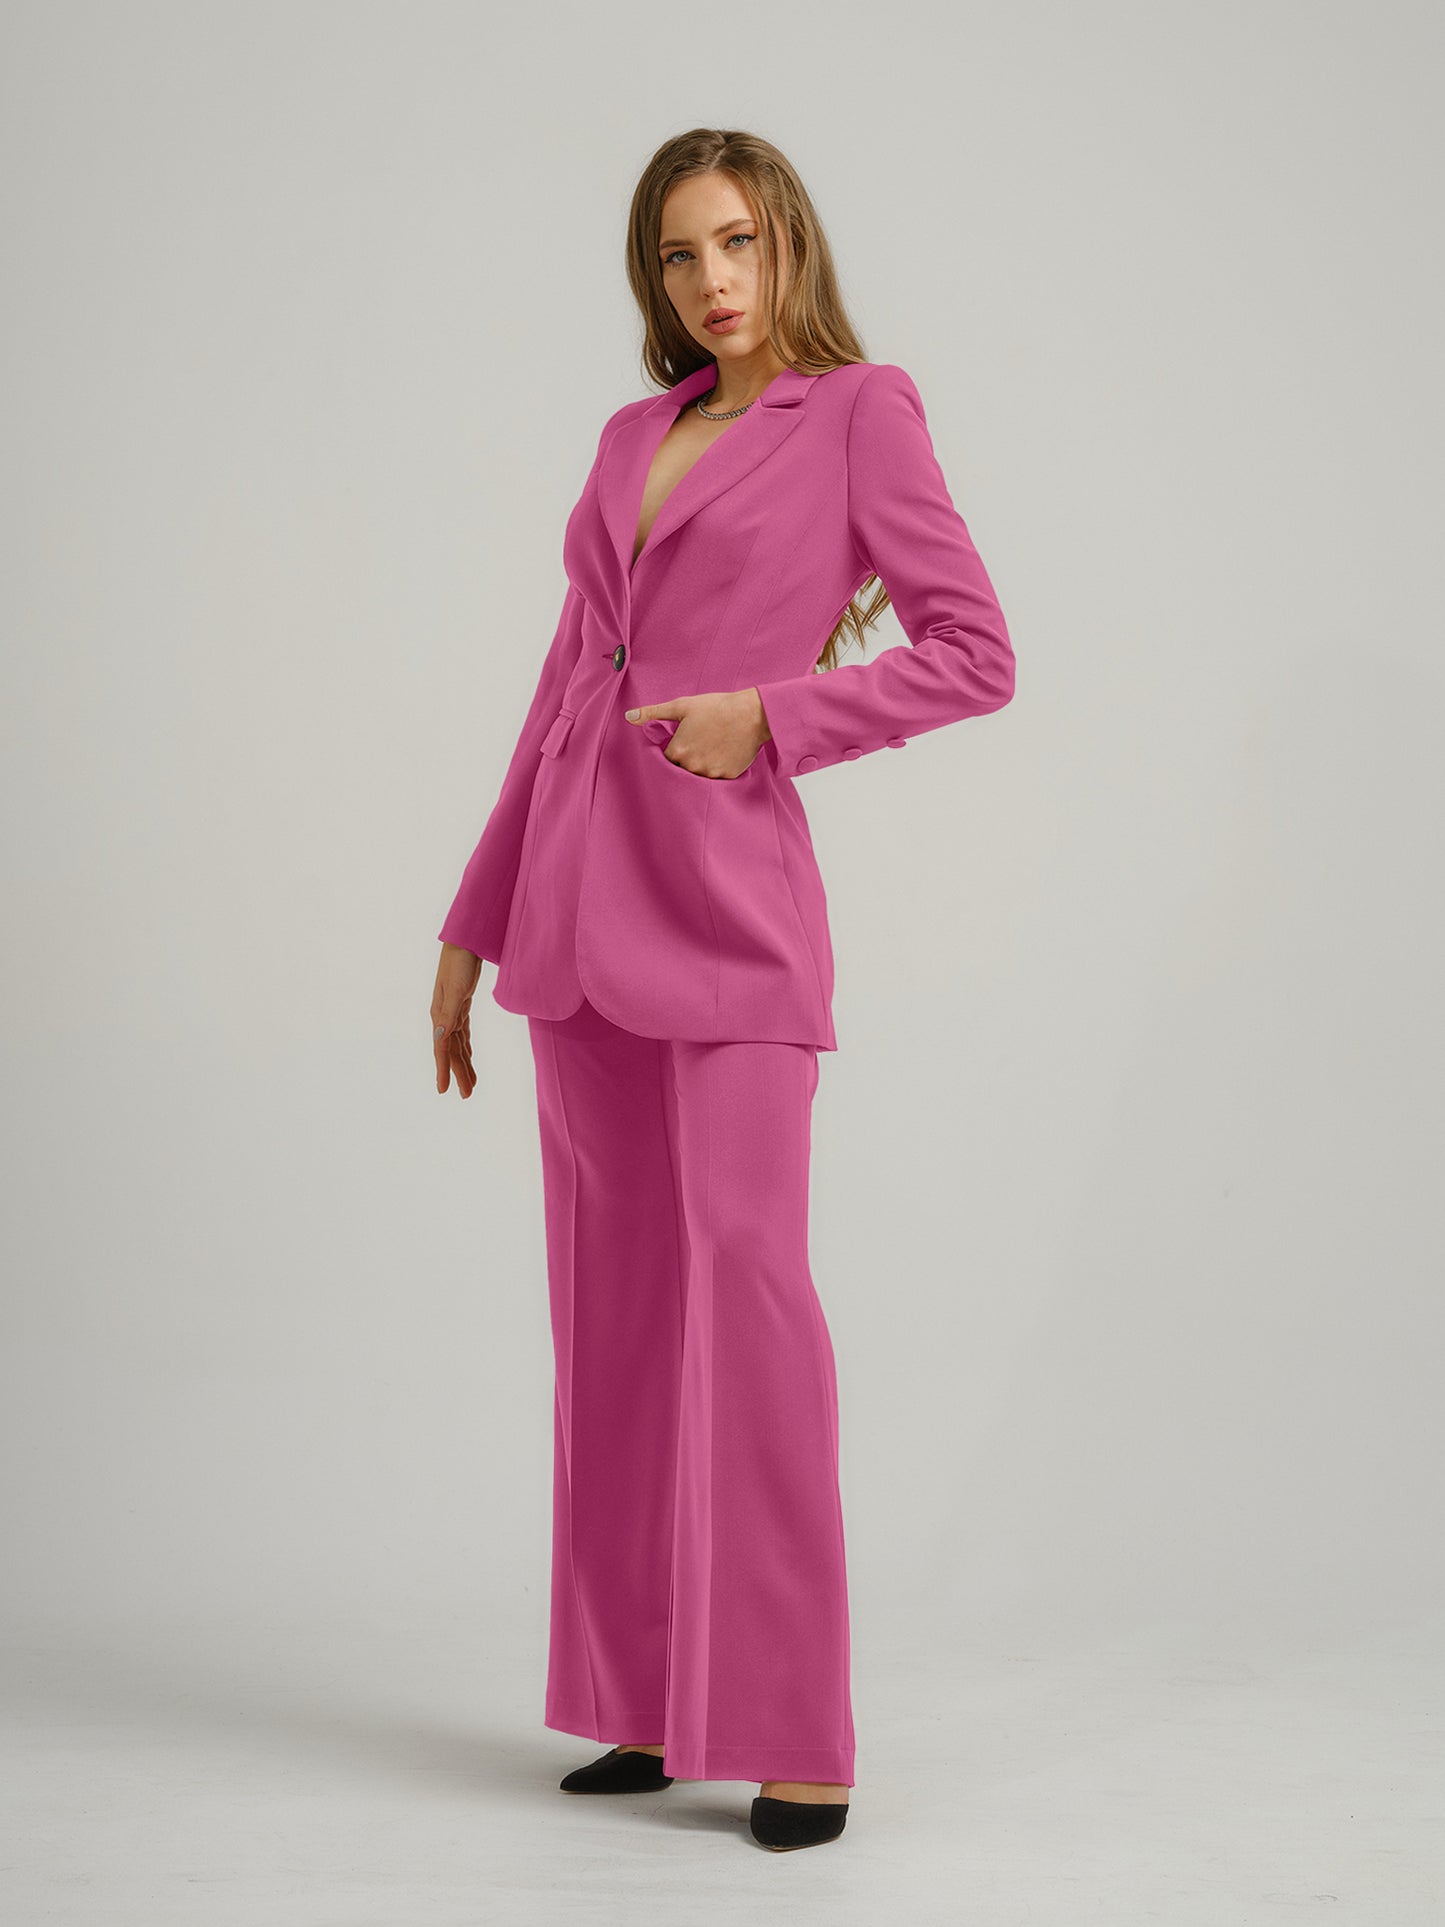 Tia Dorraine Sweet Desire Timeless Classic Blazer The thigh-length blazer is one of our favourite pieces. This statement piece features a single large button closure that emphasizes its streamlined design. It stands out with its structured shoulders, beau